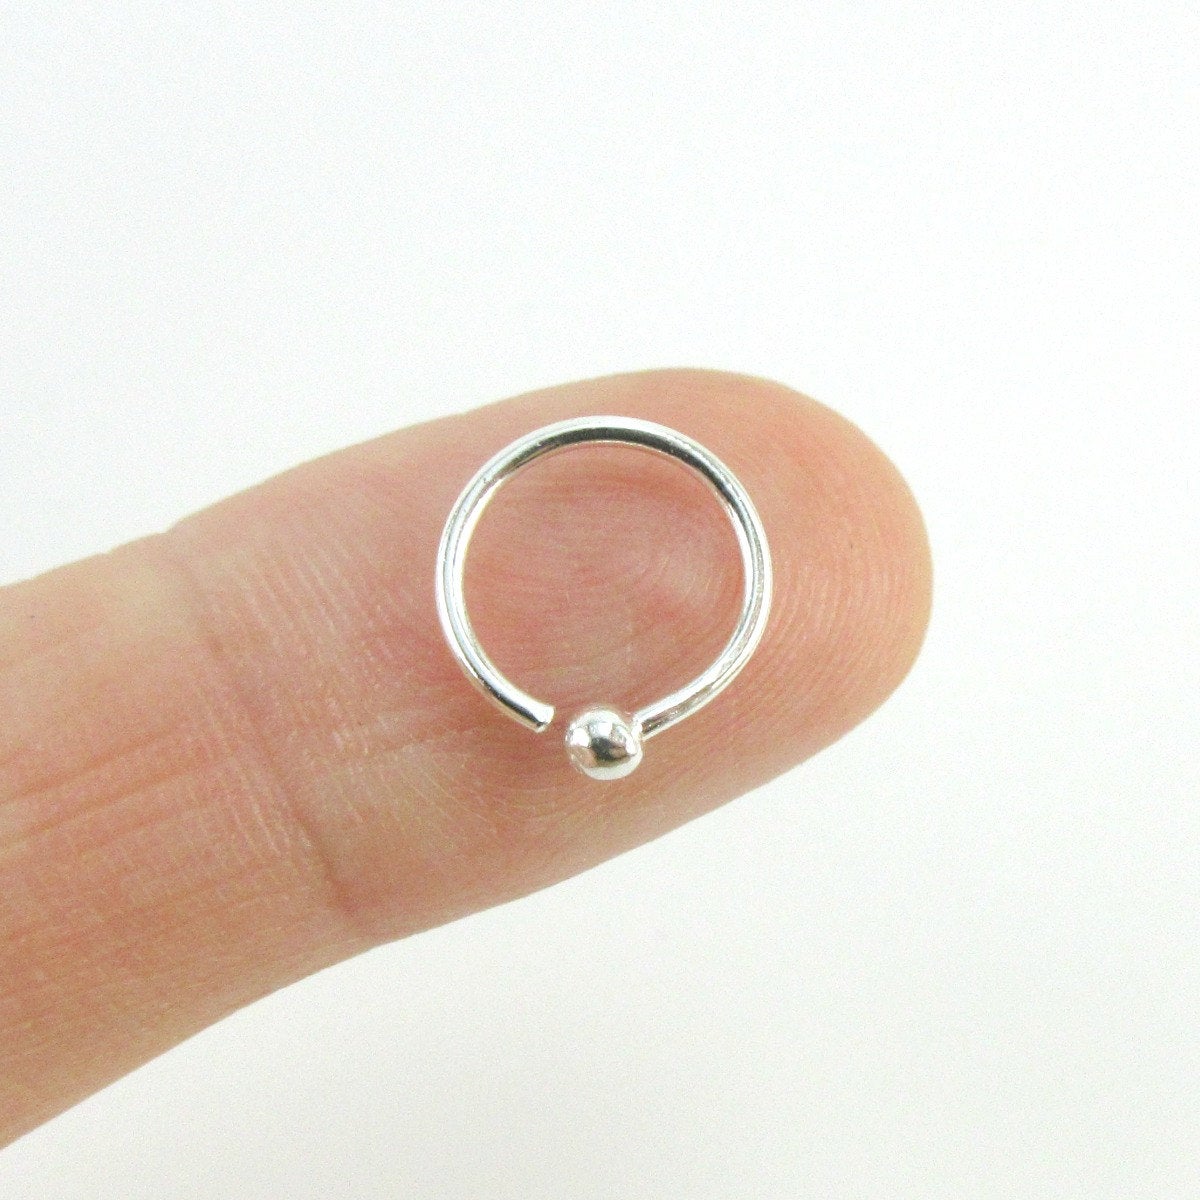 Buy Tiny Sterling Silver Opal 1.8mm Nose Stud, Nose Ring, Silver Nose Stud,  Opal Nose Ring, Sterling Nose Stud, Opal Nose Stud, Nose Ring, SN4 Online  in India - Etsy